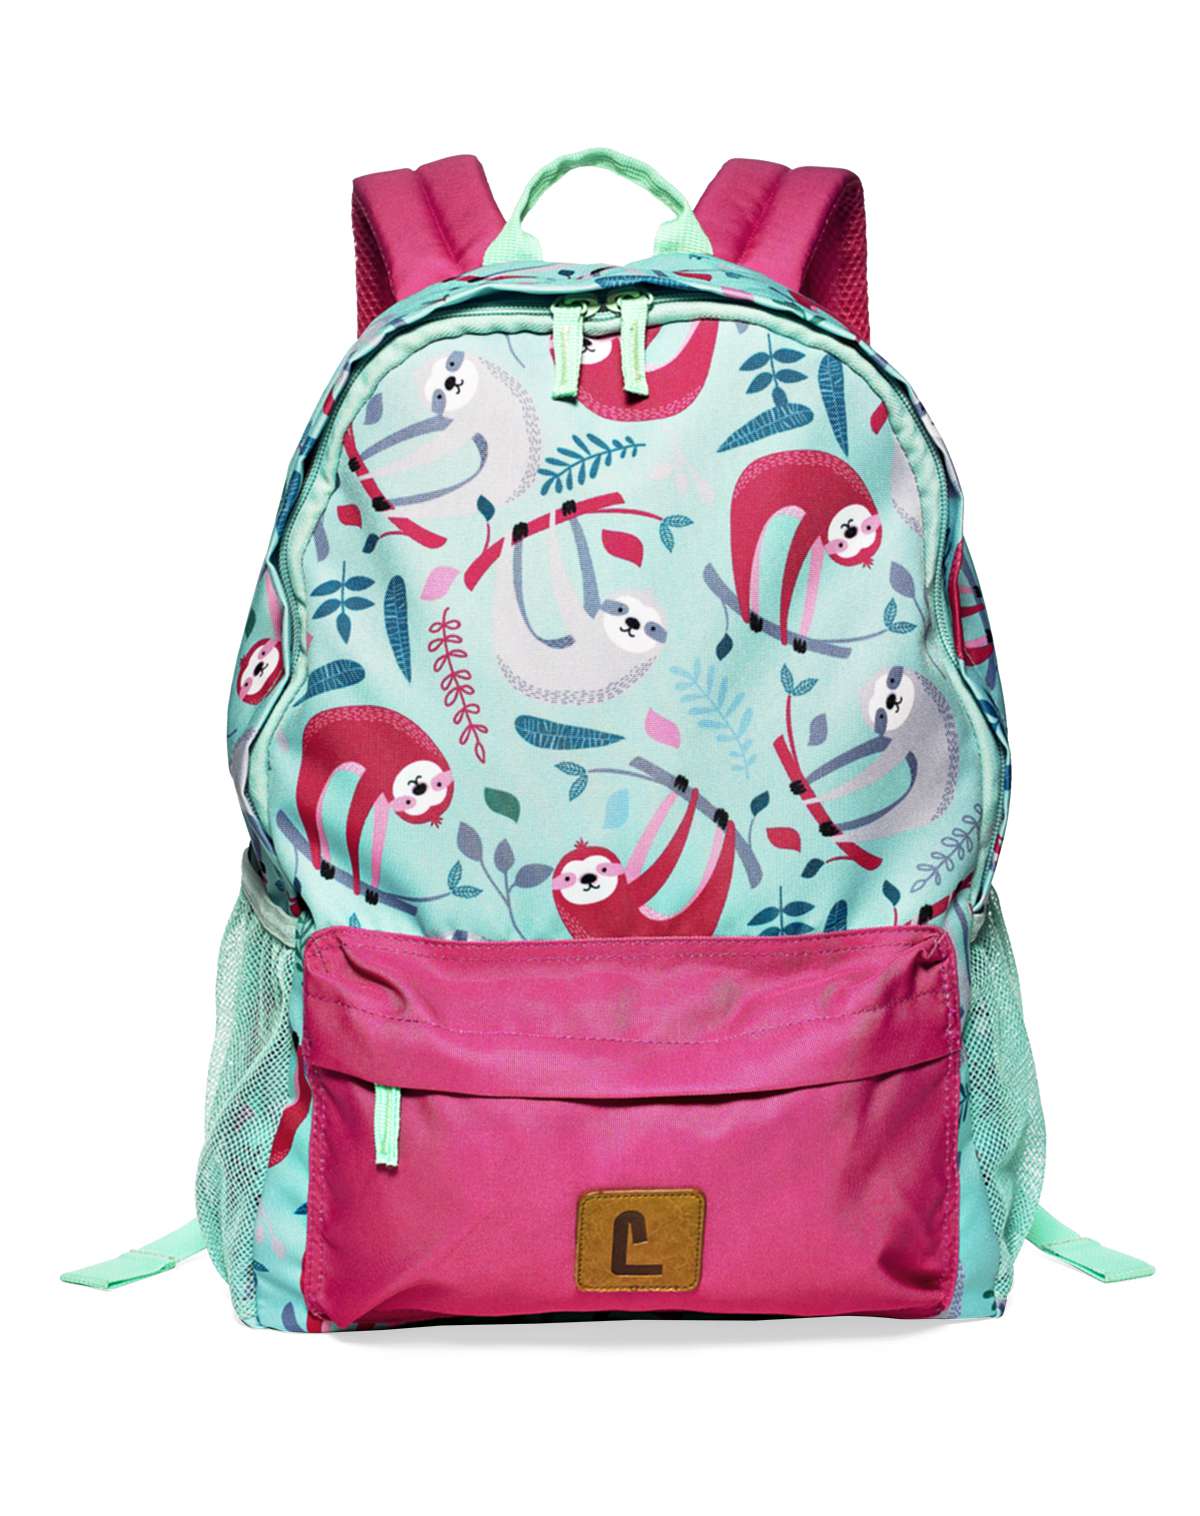 Blue and Pink Sloth Backpack